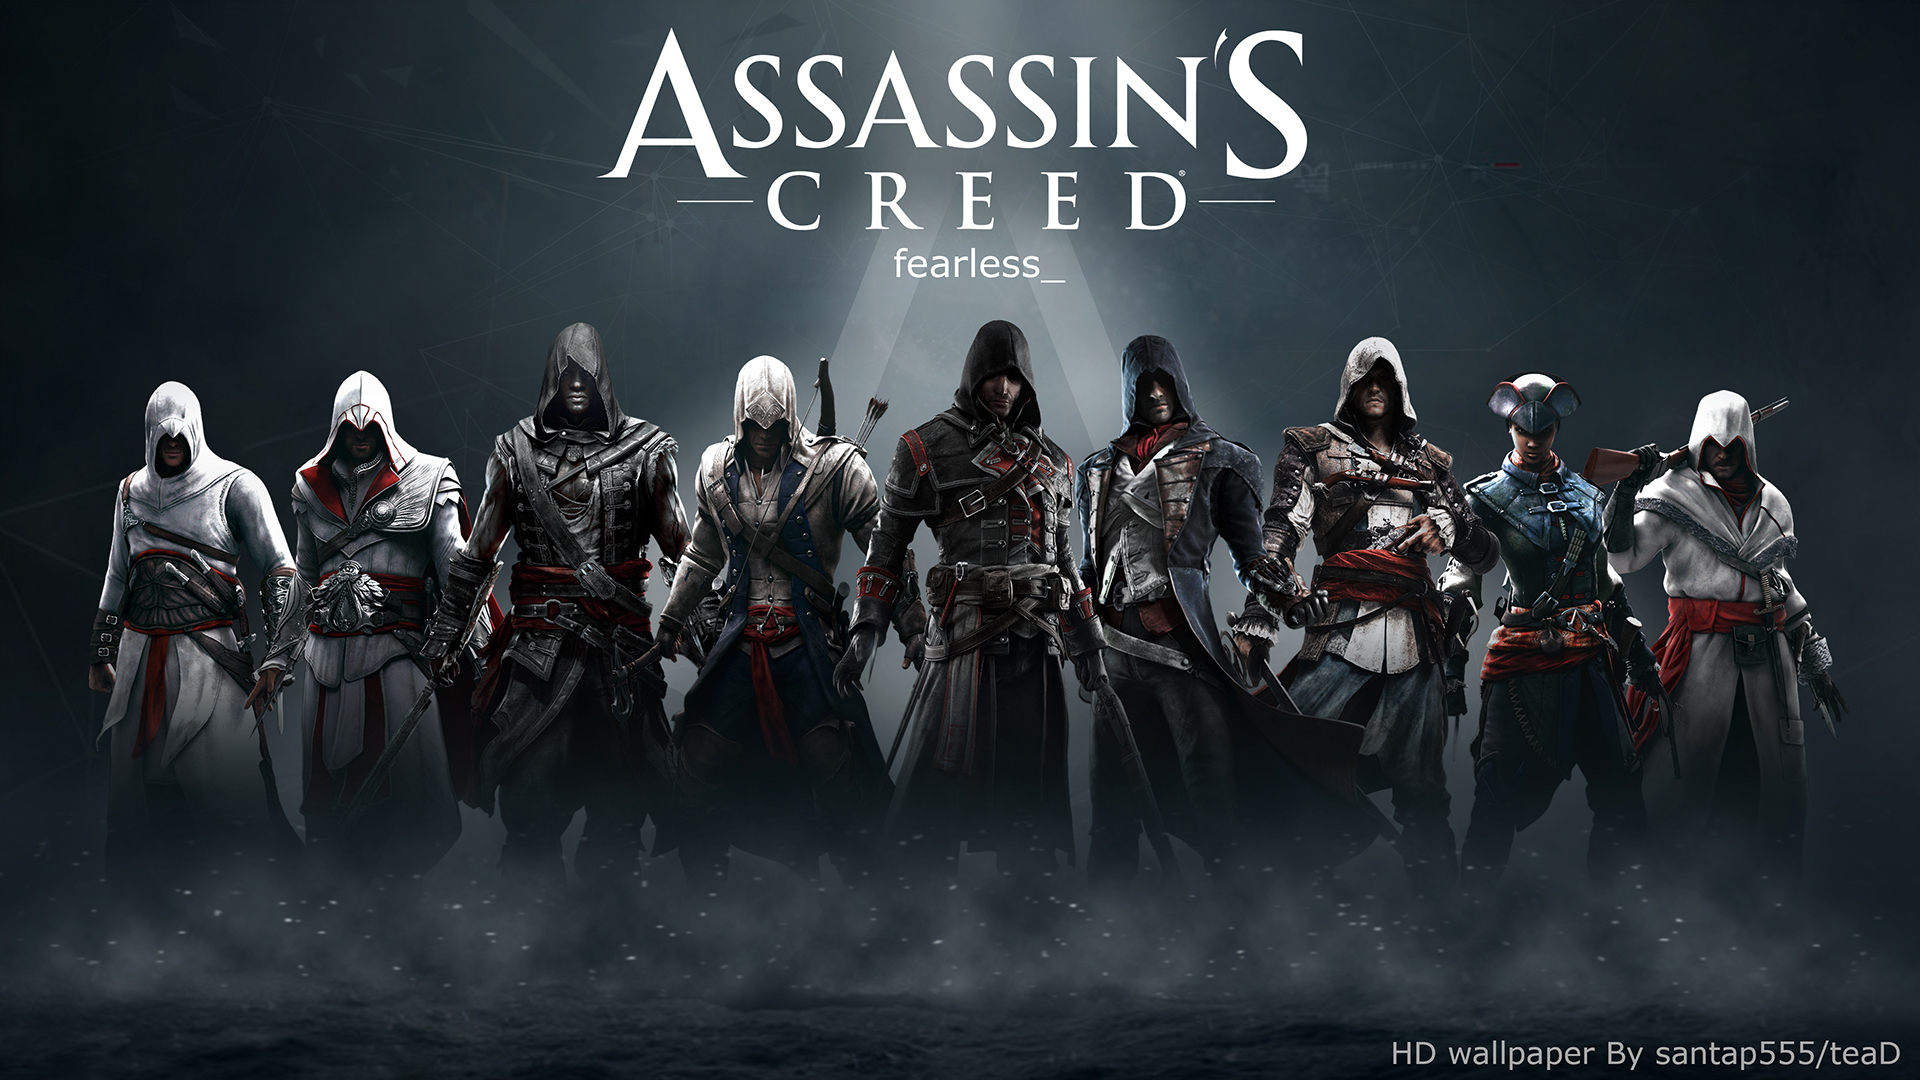 Assassins Creed HD wallpaper 2 by teaD by santap555 1920x1080